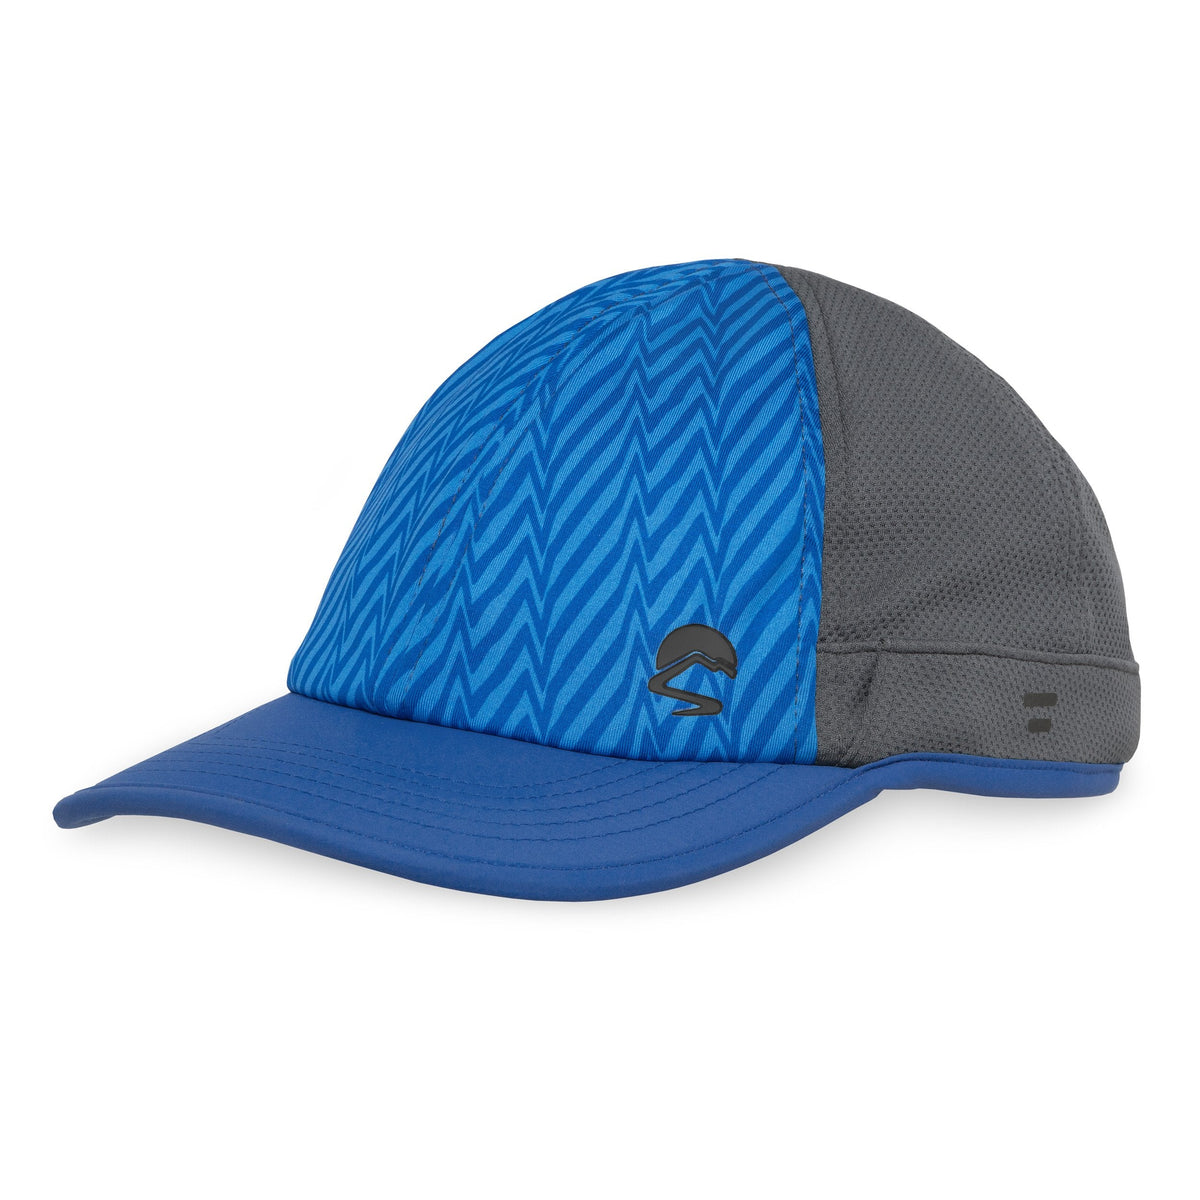 UVShield Cool Cap - SALE  Sunday Afternoons Canada